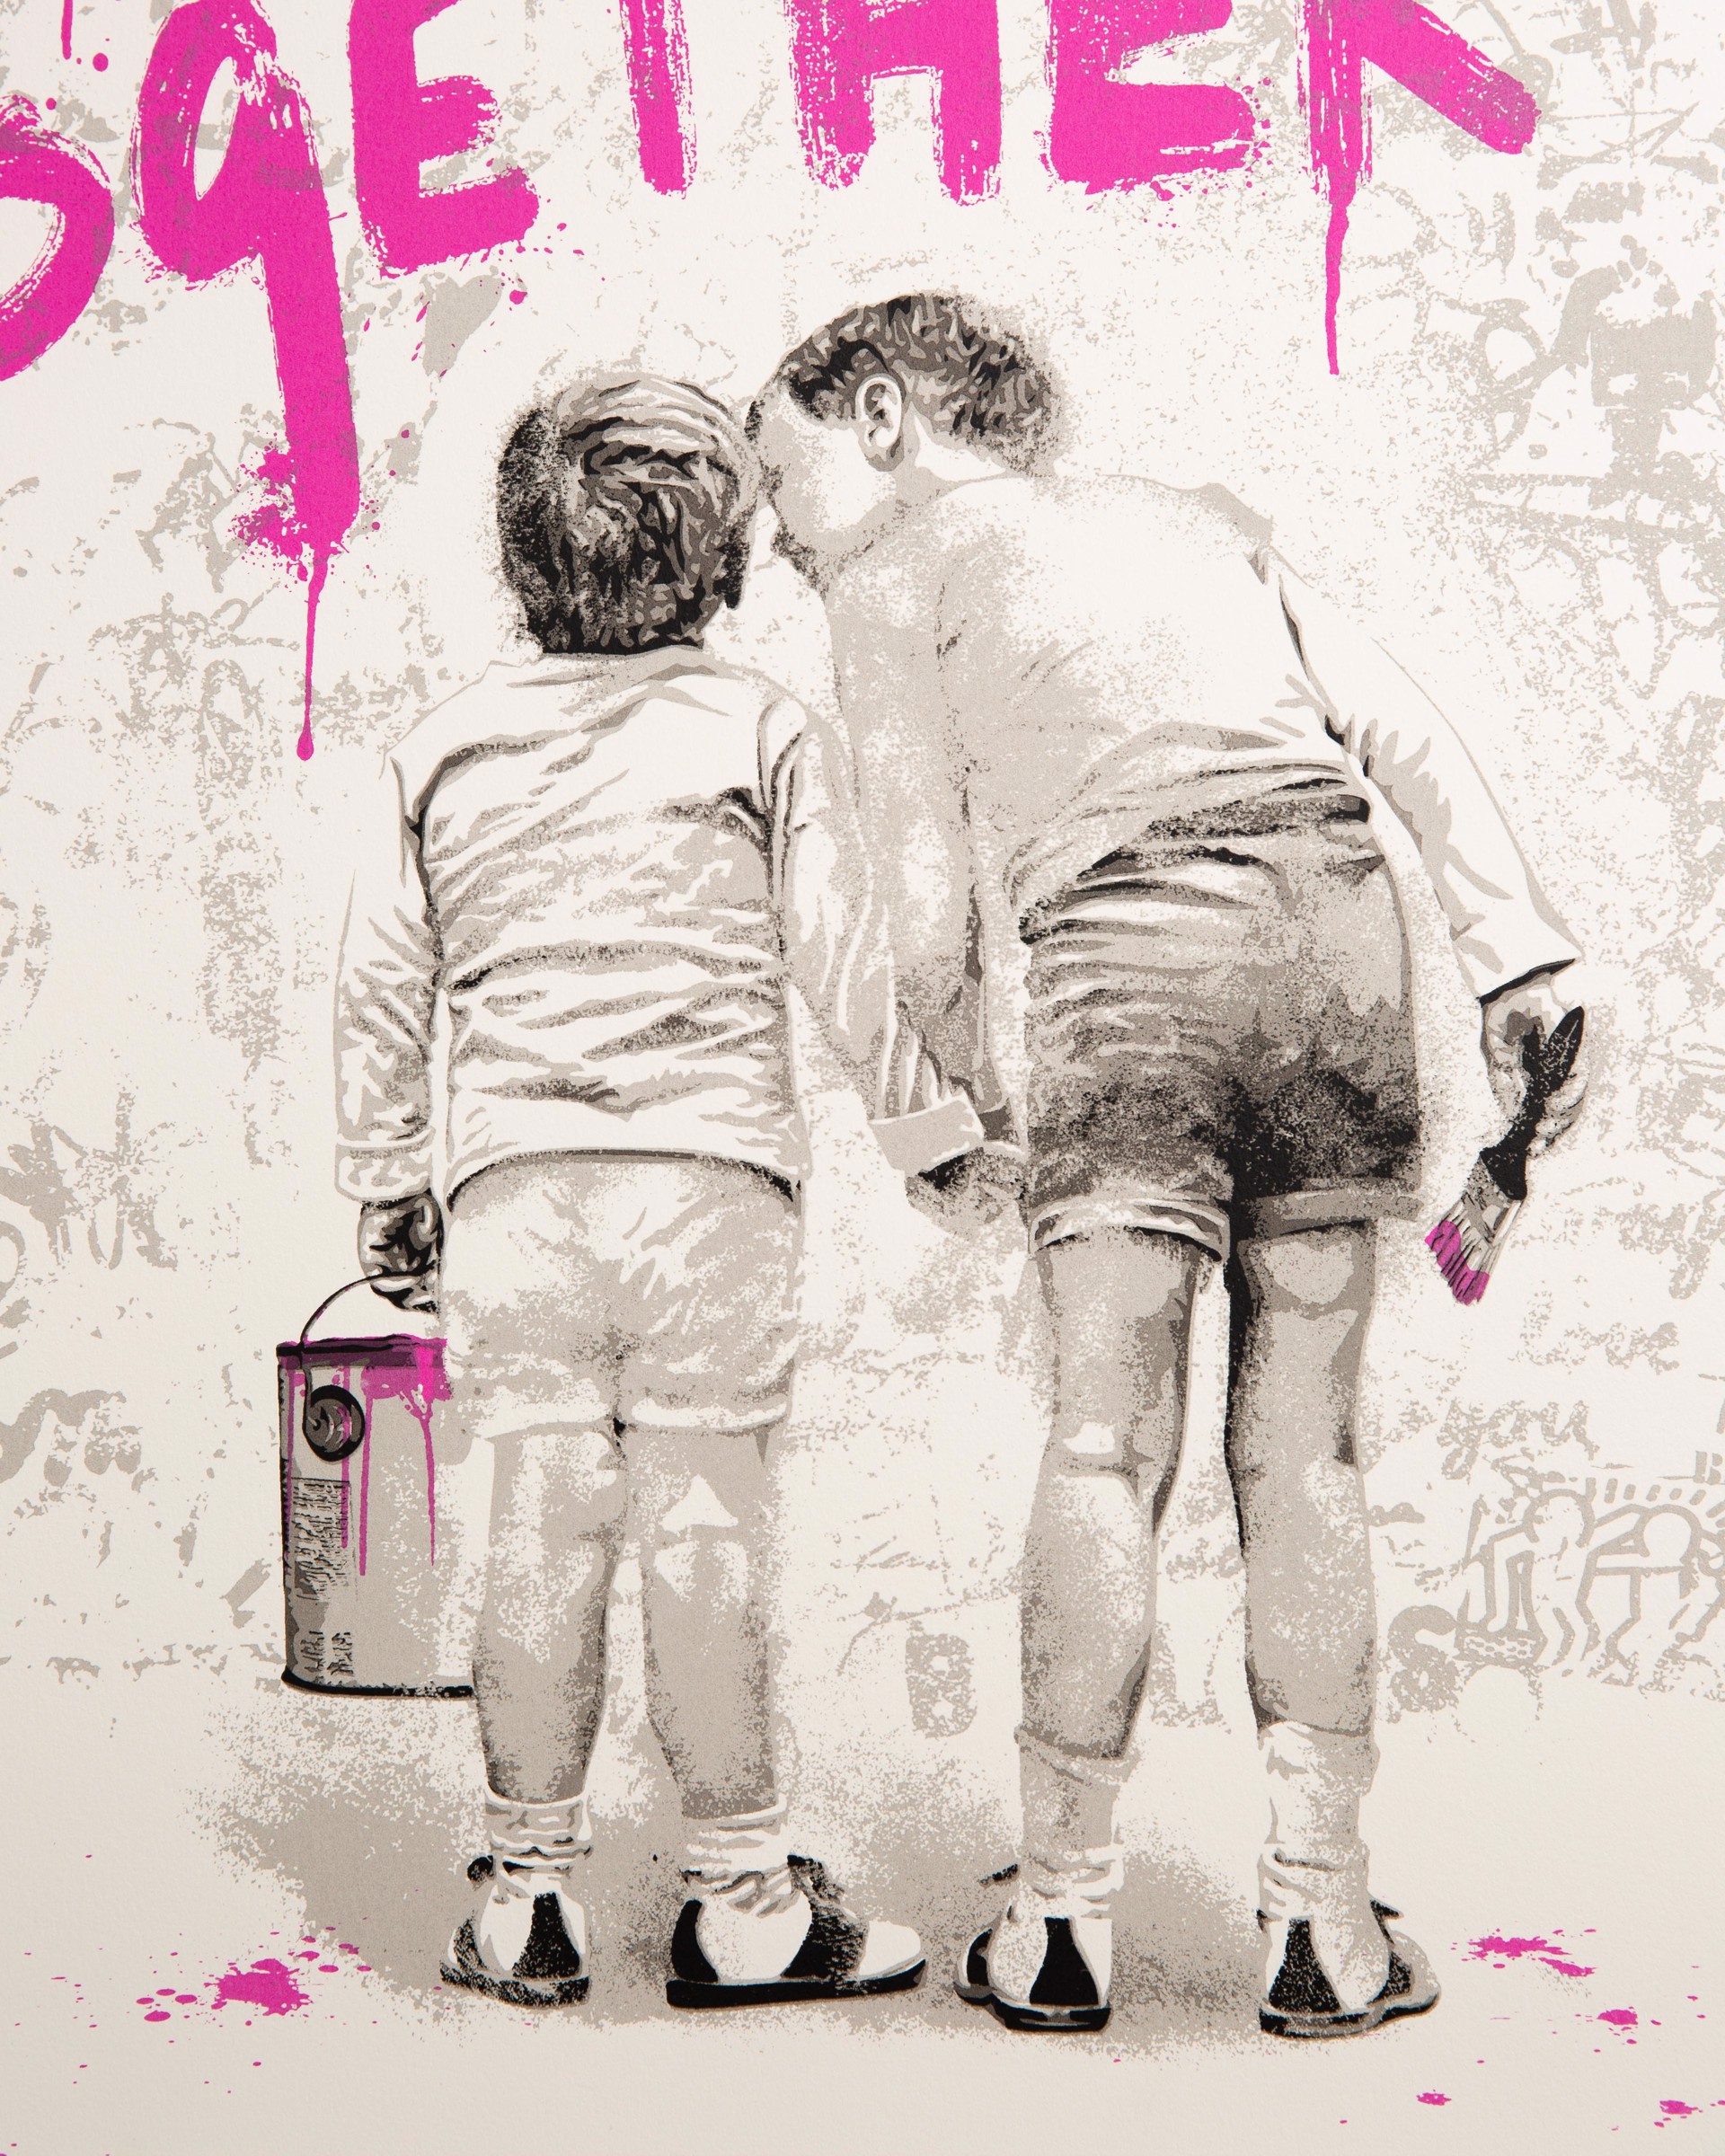 We are all in this together (Fuchsia) by Mr.Brainwash